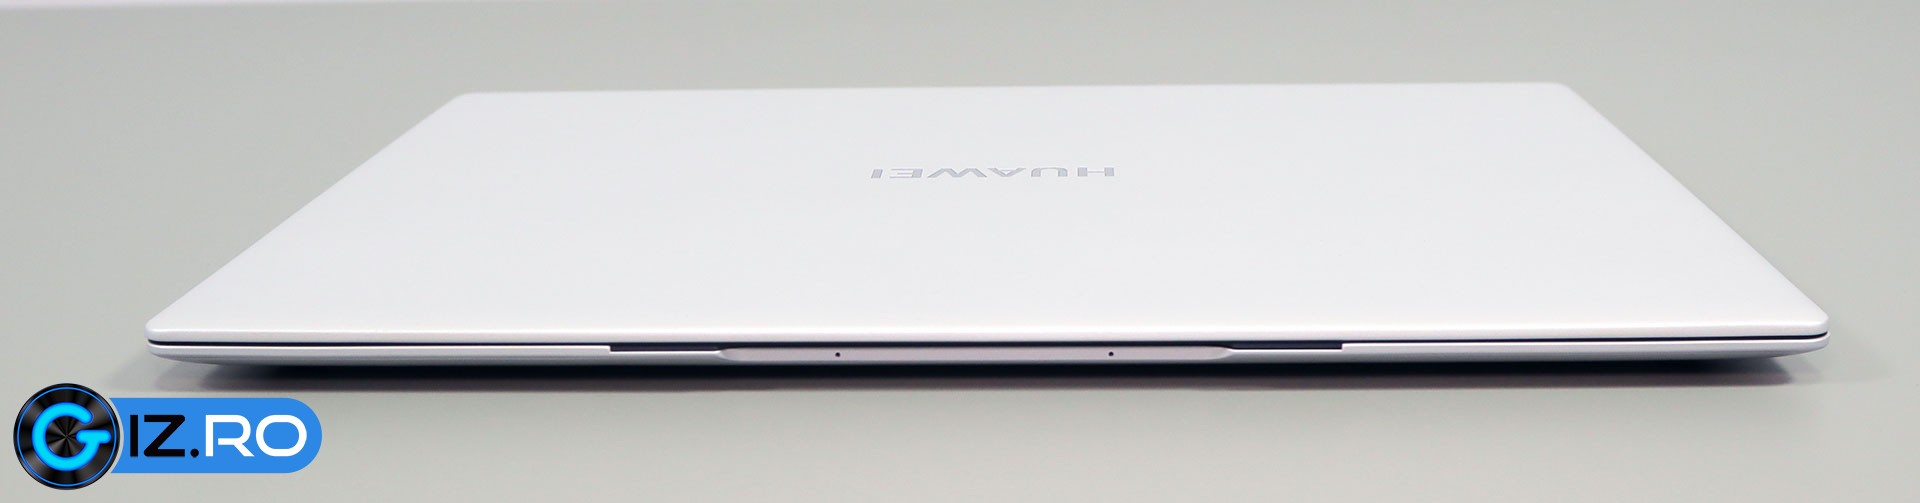 huawei-matebook-x-sides-front